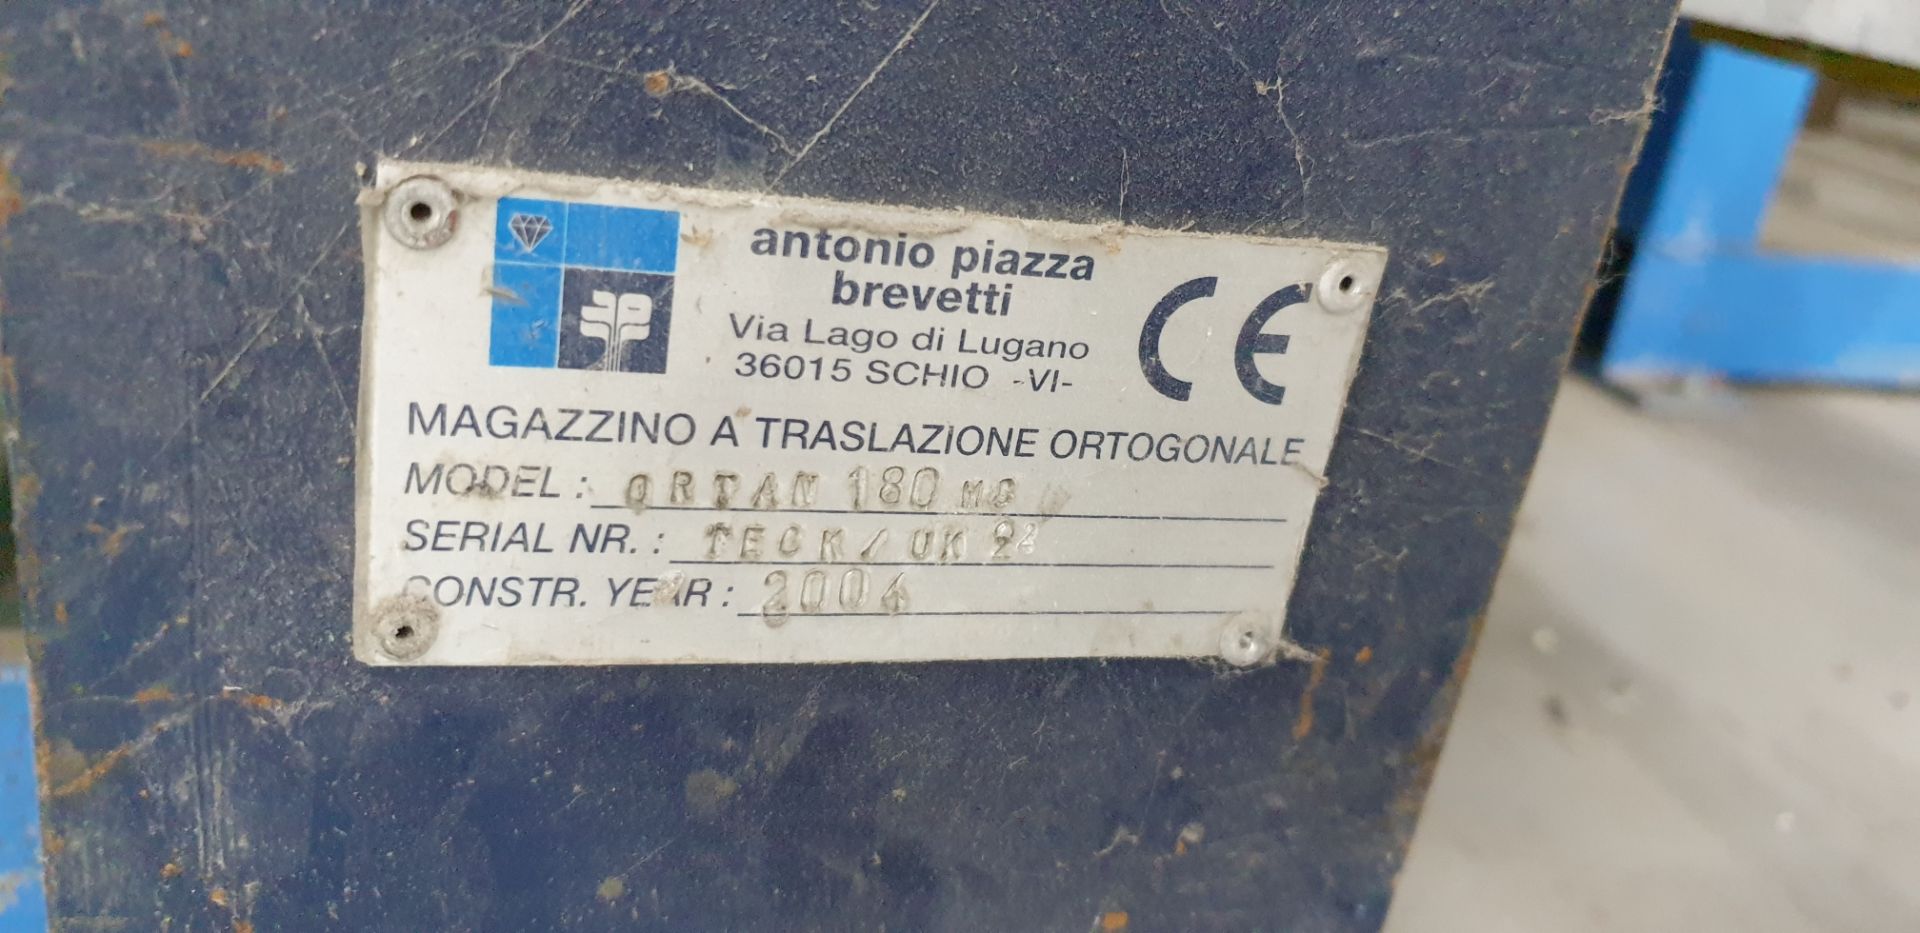 Antonio Piazza Brevetti, Grtan 180MC, 9 Station Pull-Out Glass Panel Rack With 1.2 Ton Overhead Stor - Image 4 of 4